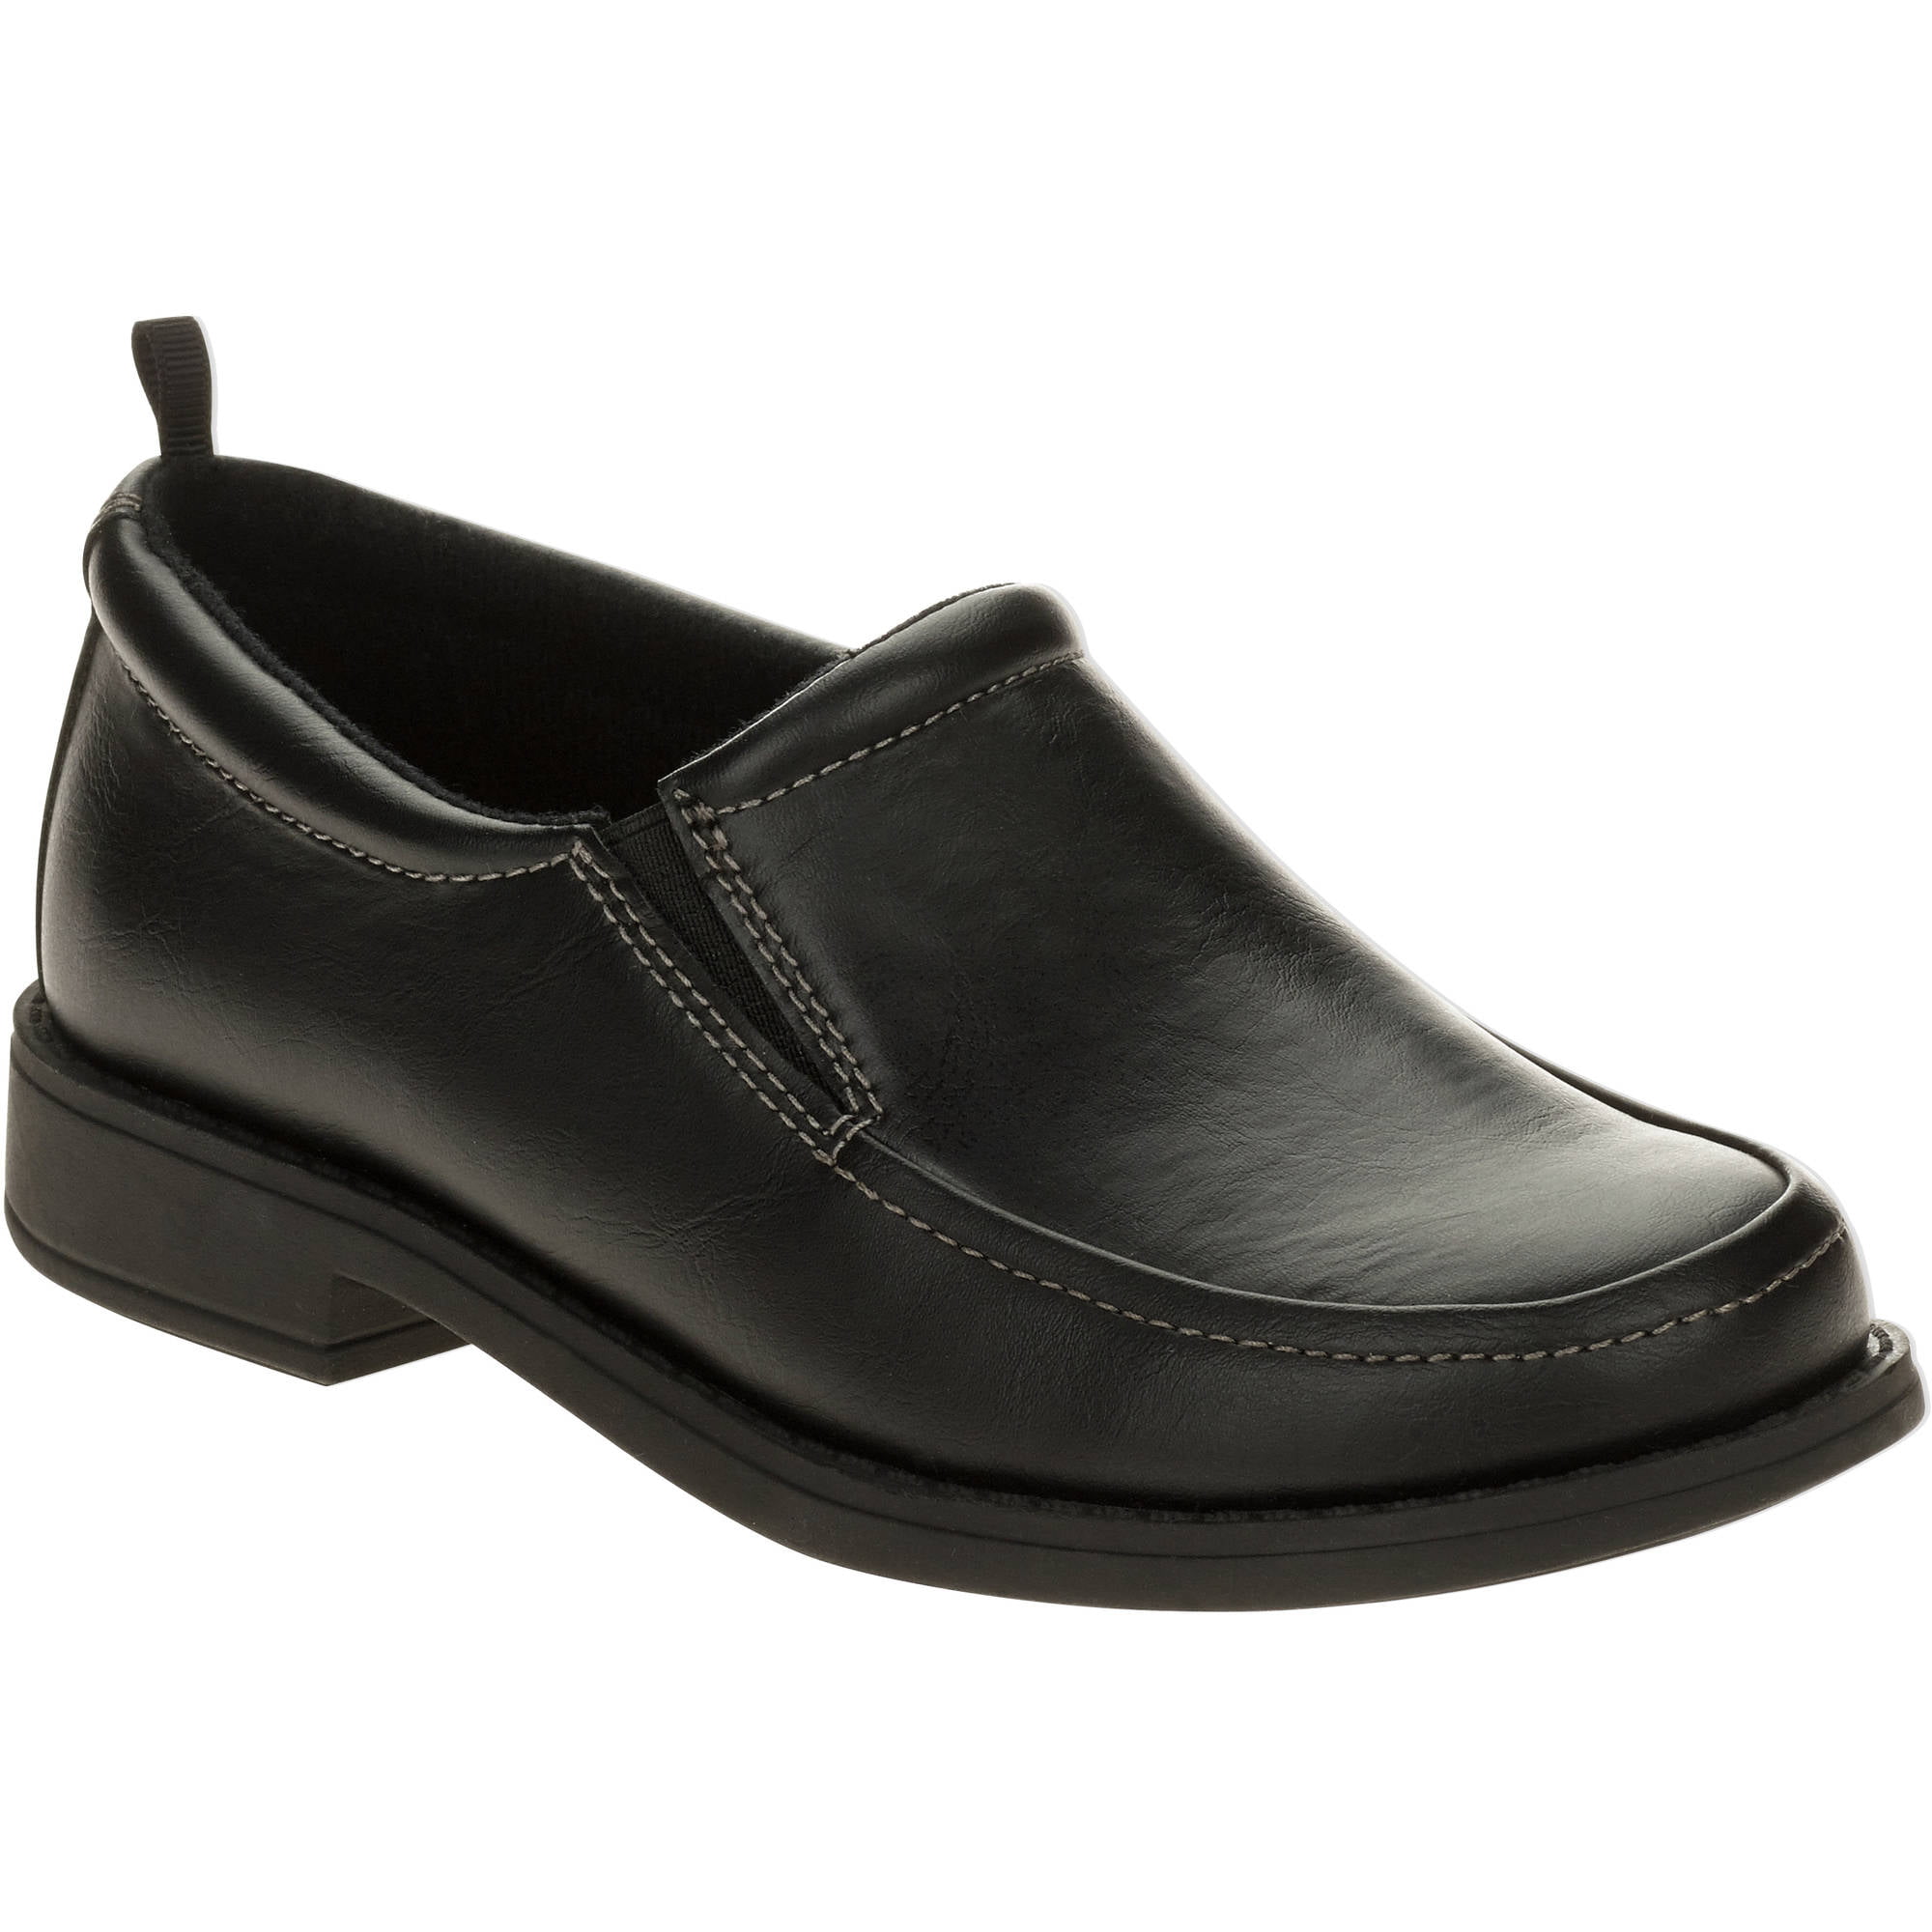 POD Durham Boys Slip On Real Leather Microfibre Casual Formal School Shoes 